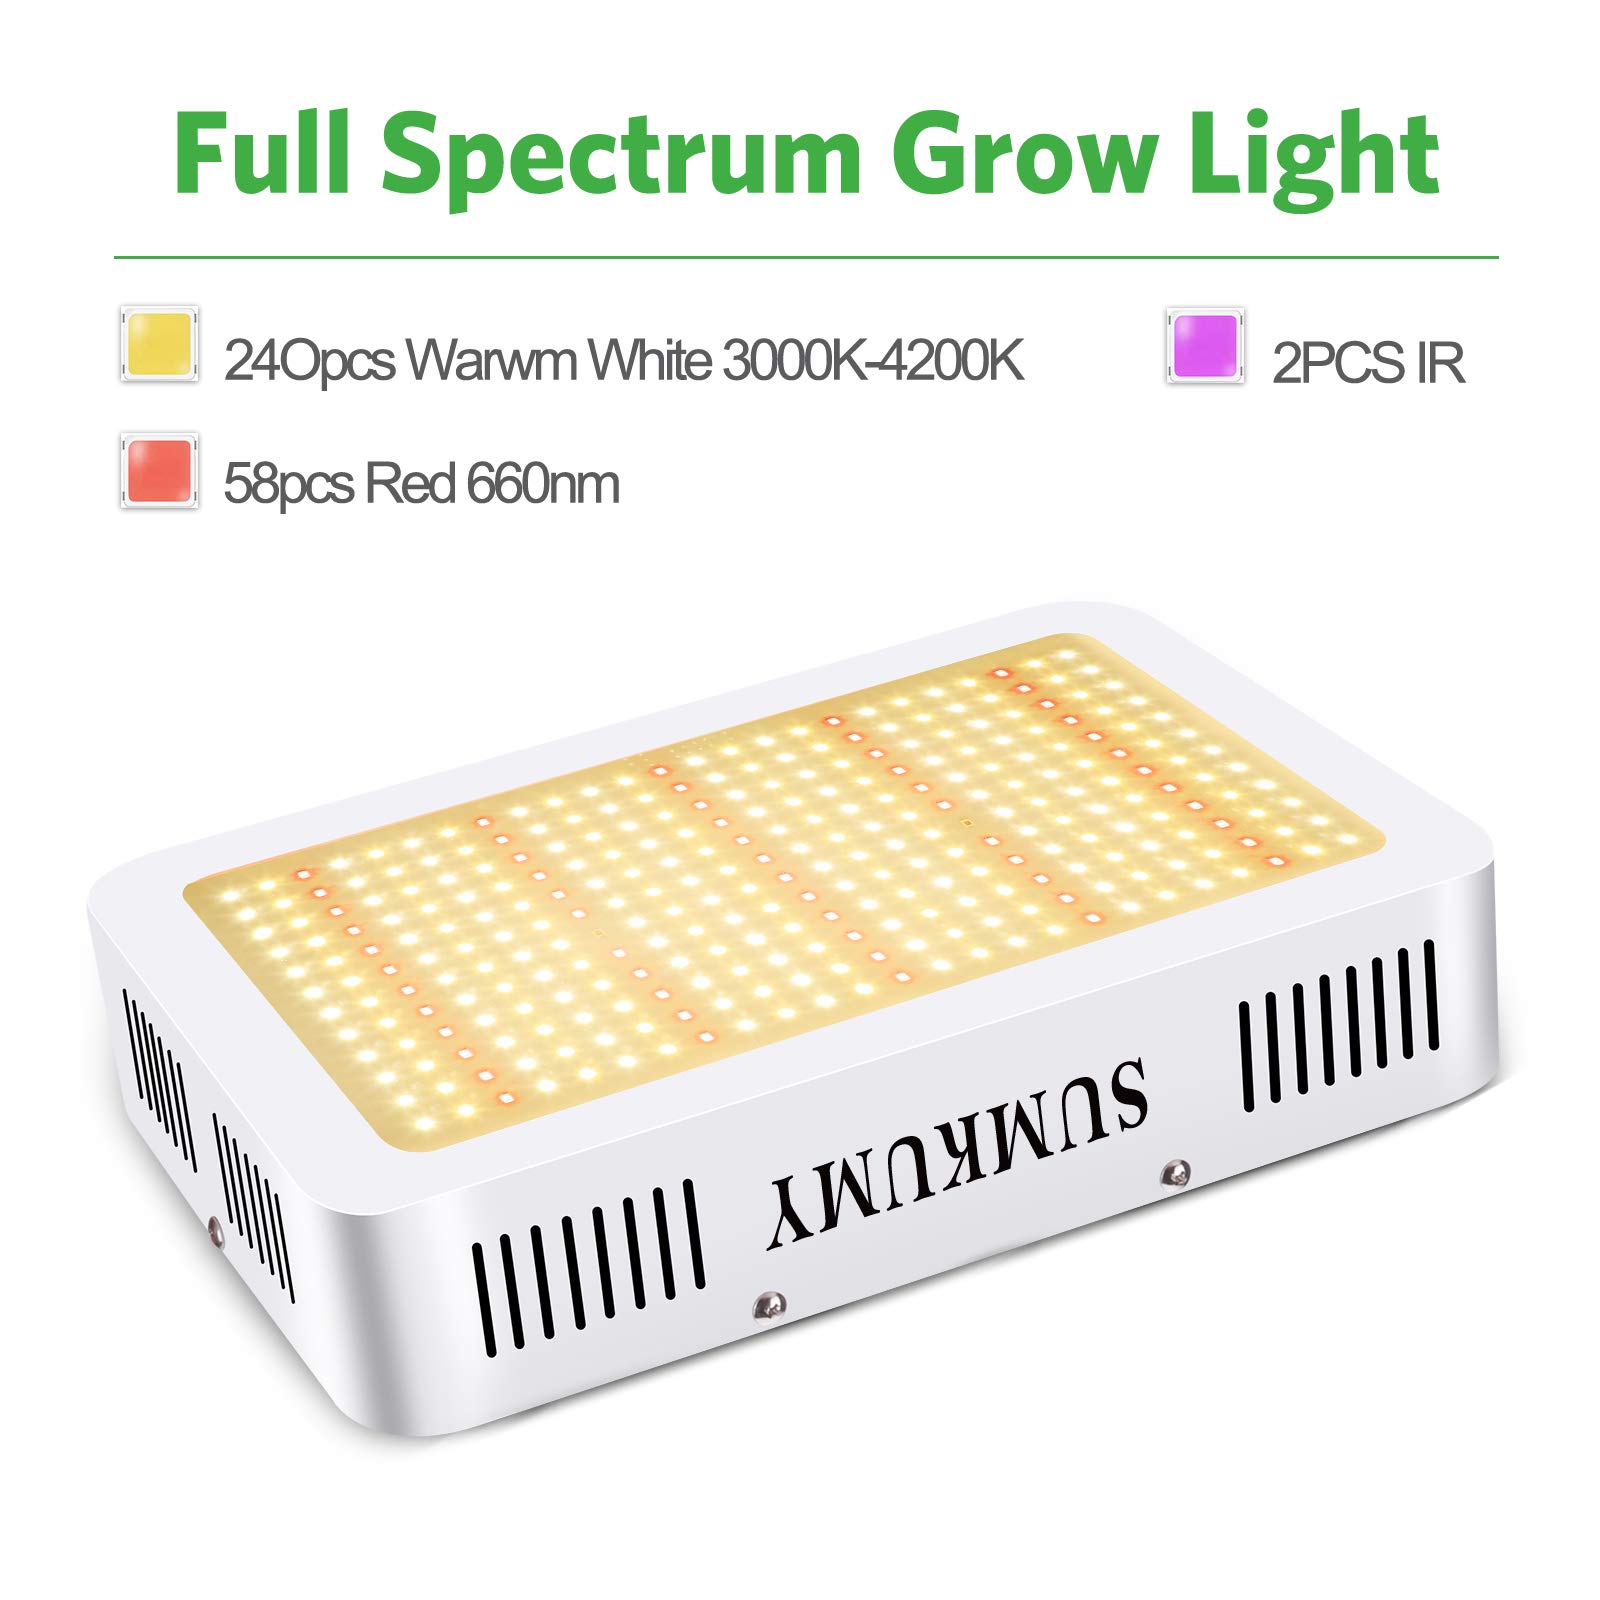 SUMKUMY Upgrade 1200W Plant Grow Light, Full Spectrum Panel LED Grow Lamp for for Indoor Plants, Micro Greens, Succulents, Seedlings